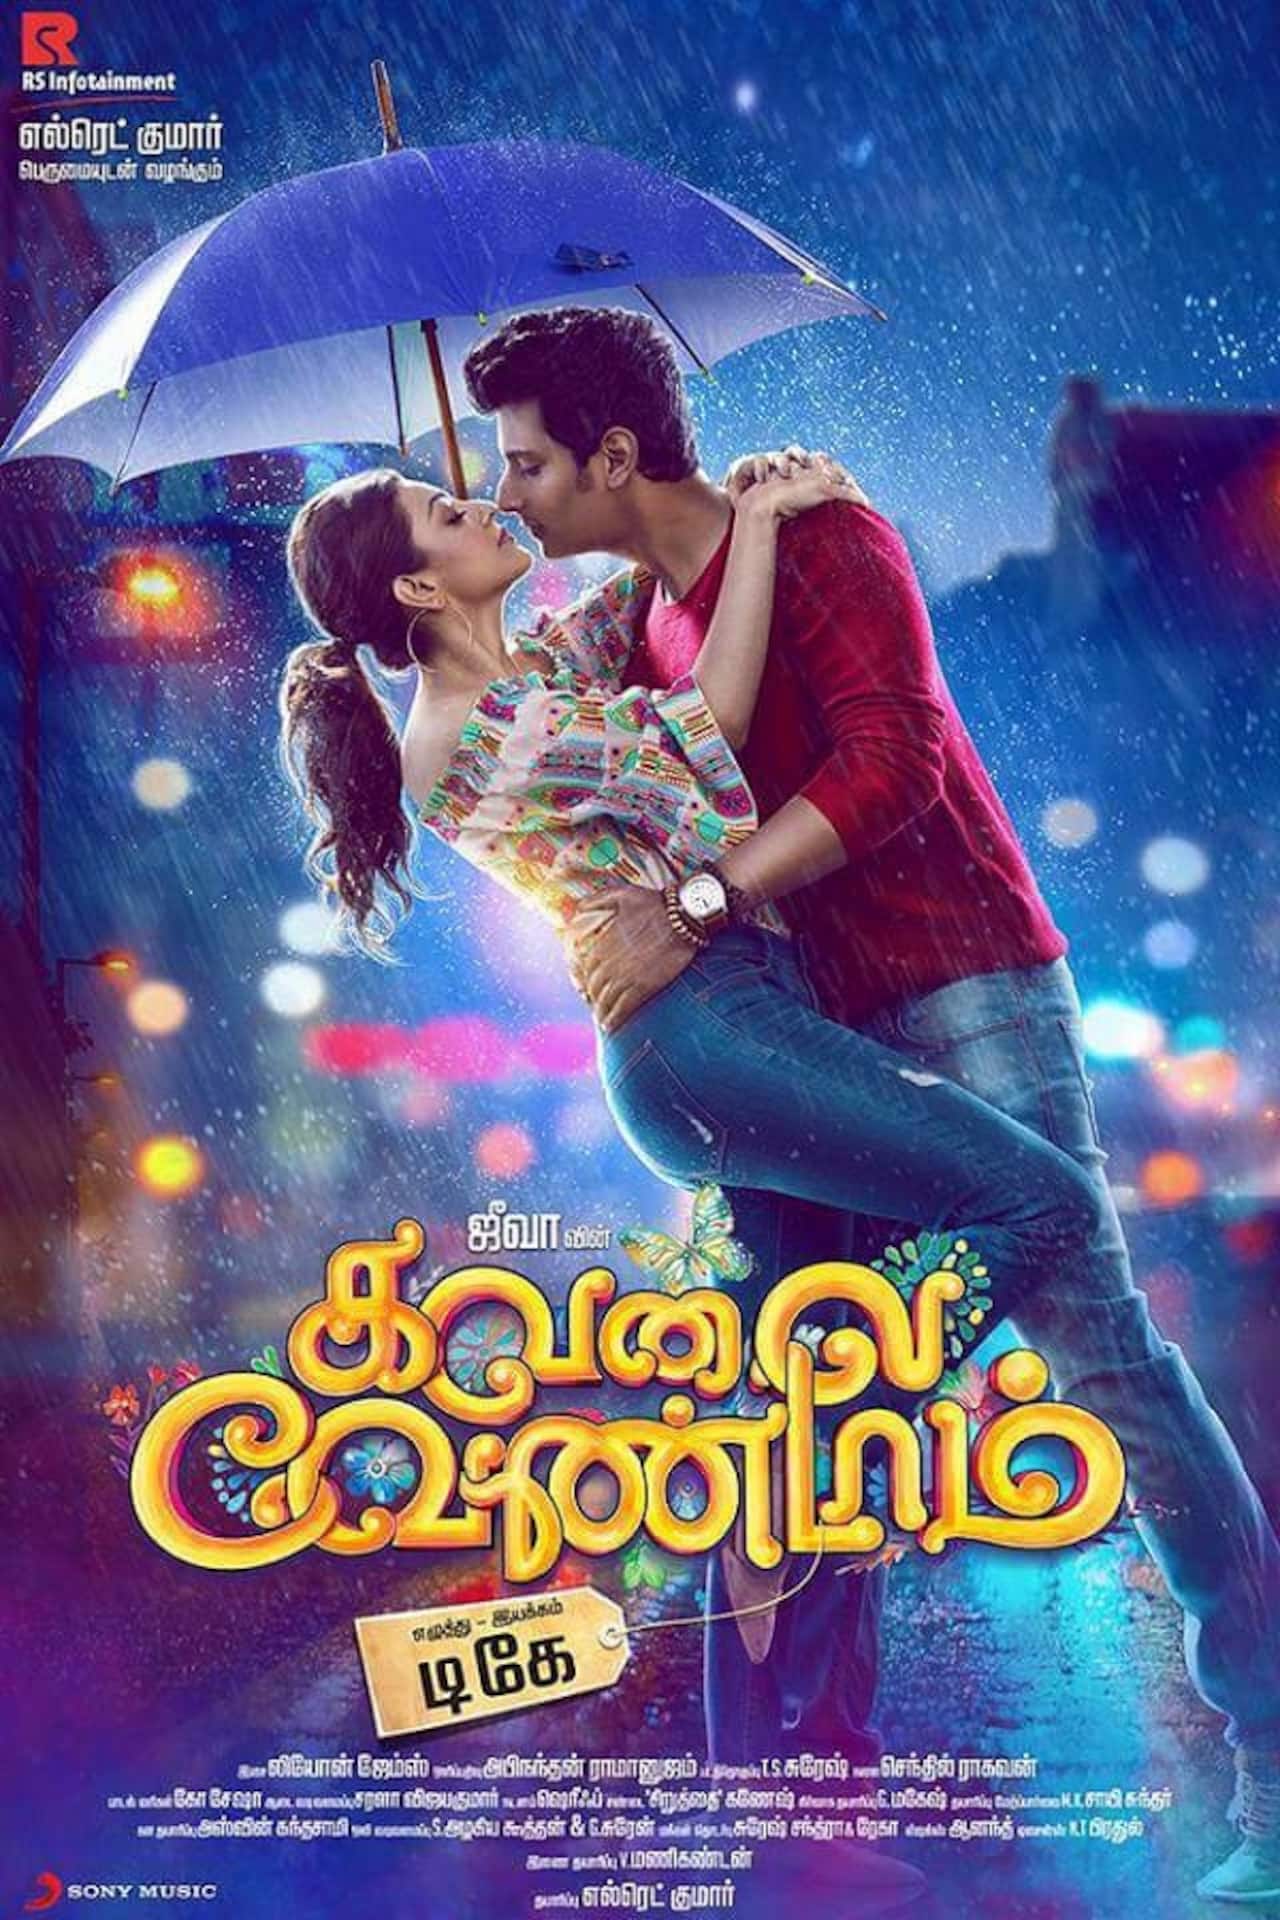 Kavalai Vendam tweet review: Kajal Aggarwal-Jiiva's take on love and relationships is fun and refreshing